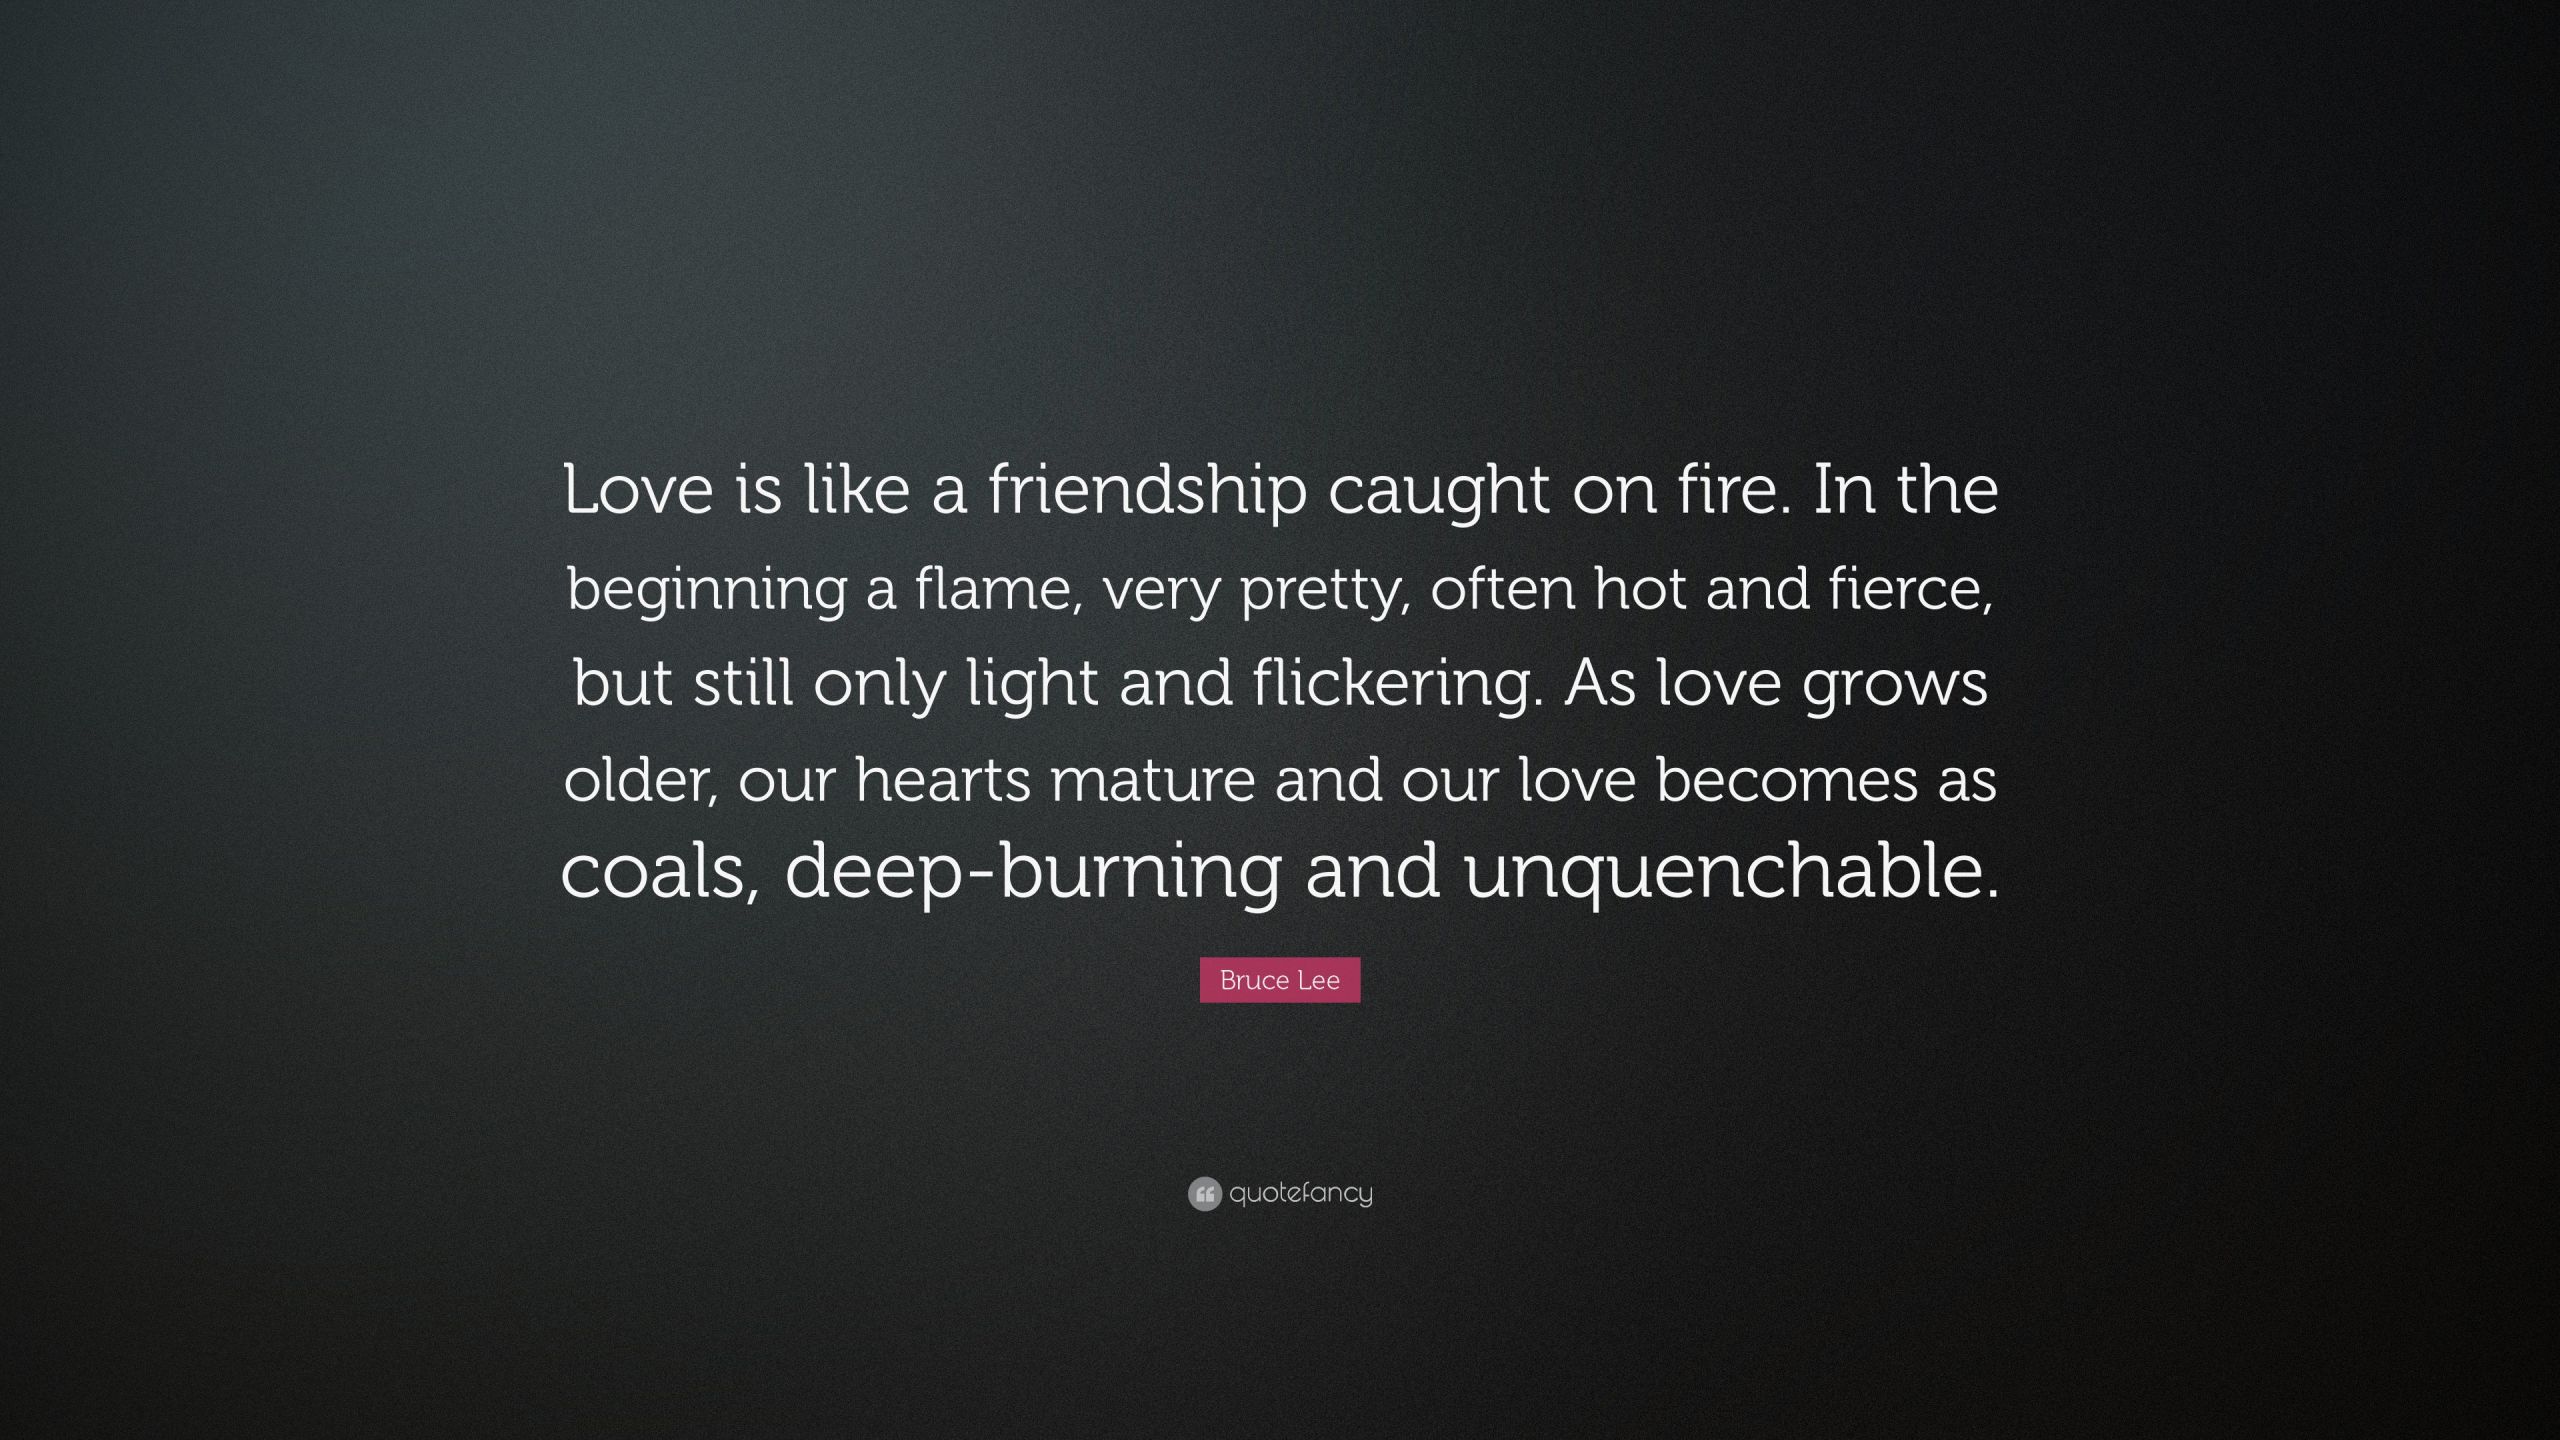 Quotes About Fire And Love
 Bruce Lee Quote “Love is like a friendship caught on fire